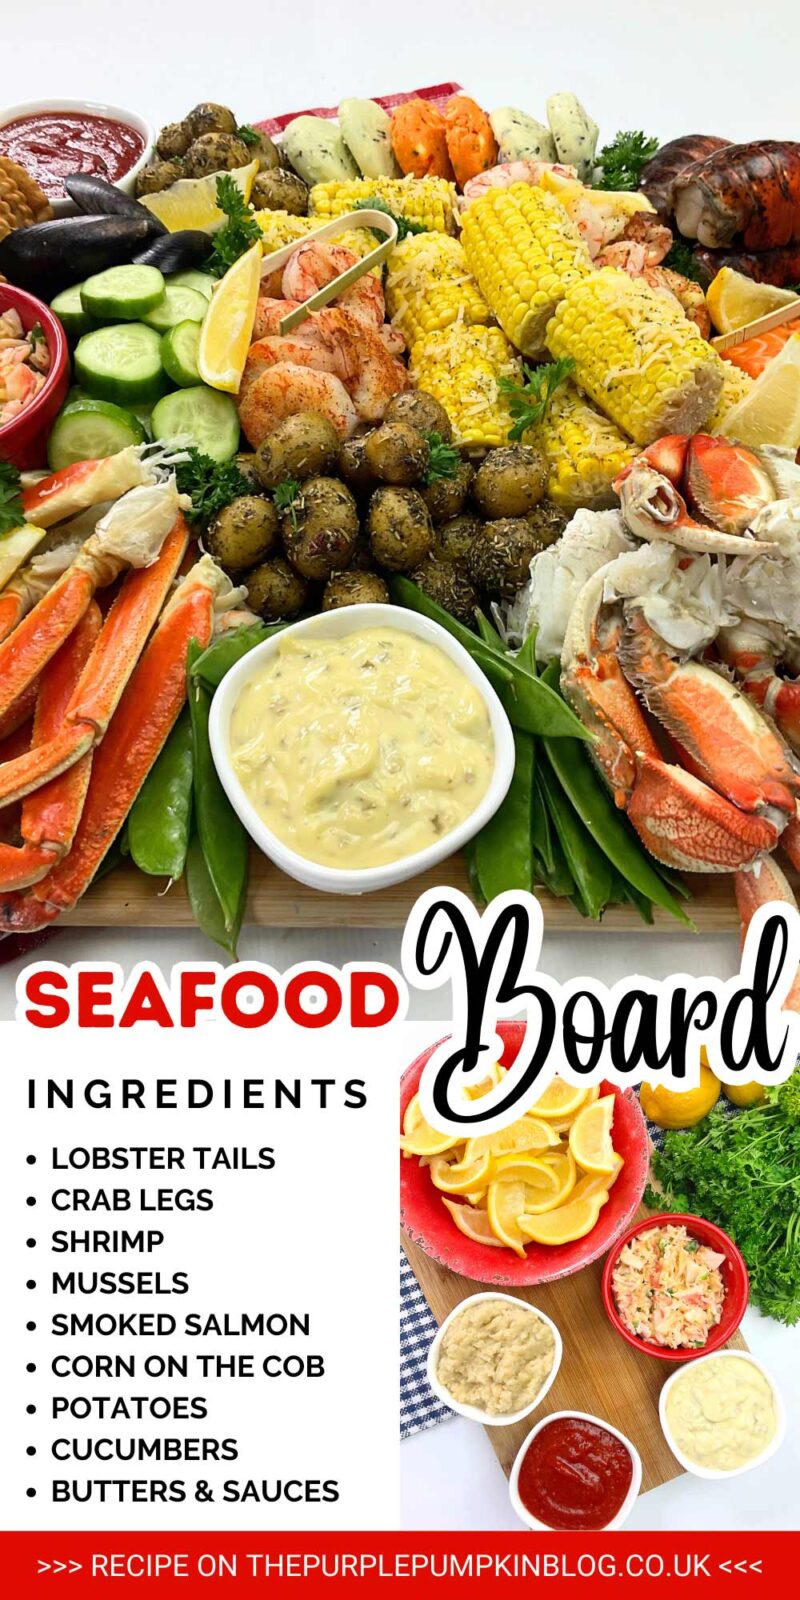 Ingredients for Seafood Board